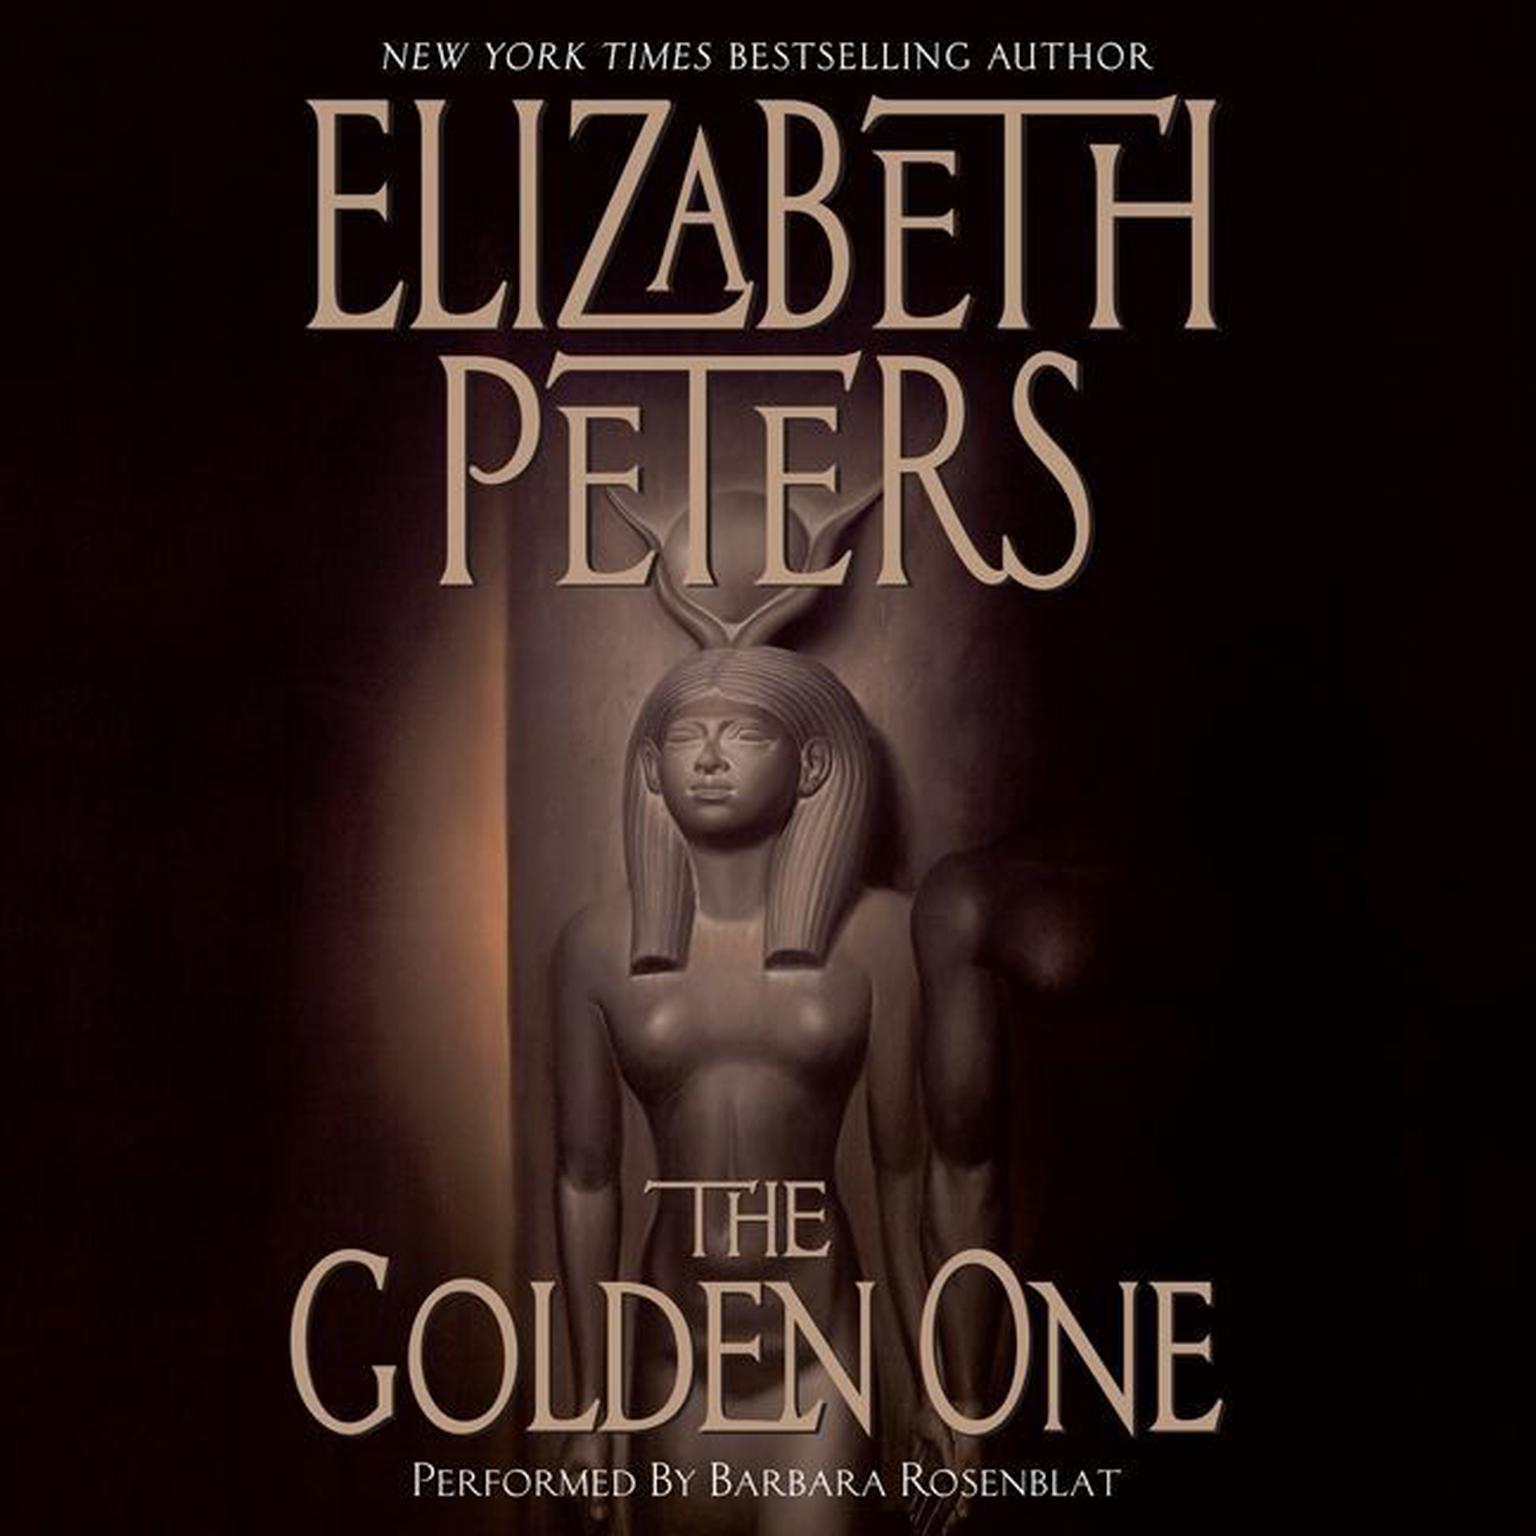 The Golden One: An Amelia Peabody Novel of Suspense Audiobook, by Elizabeth Peters